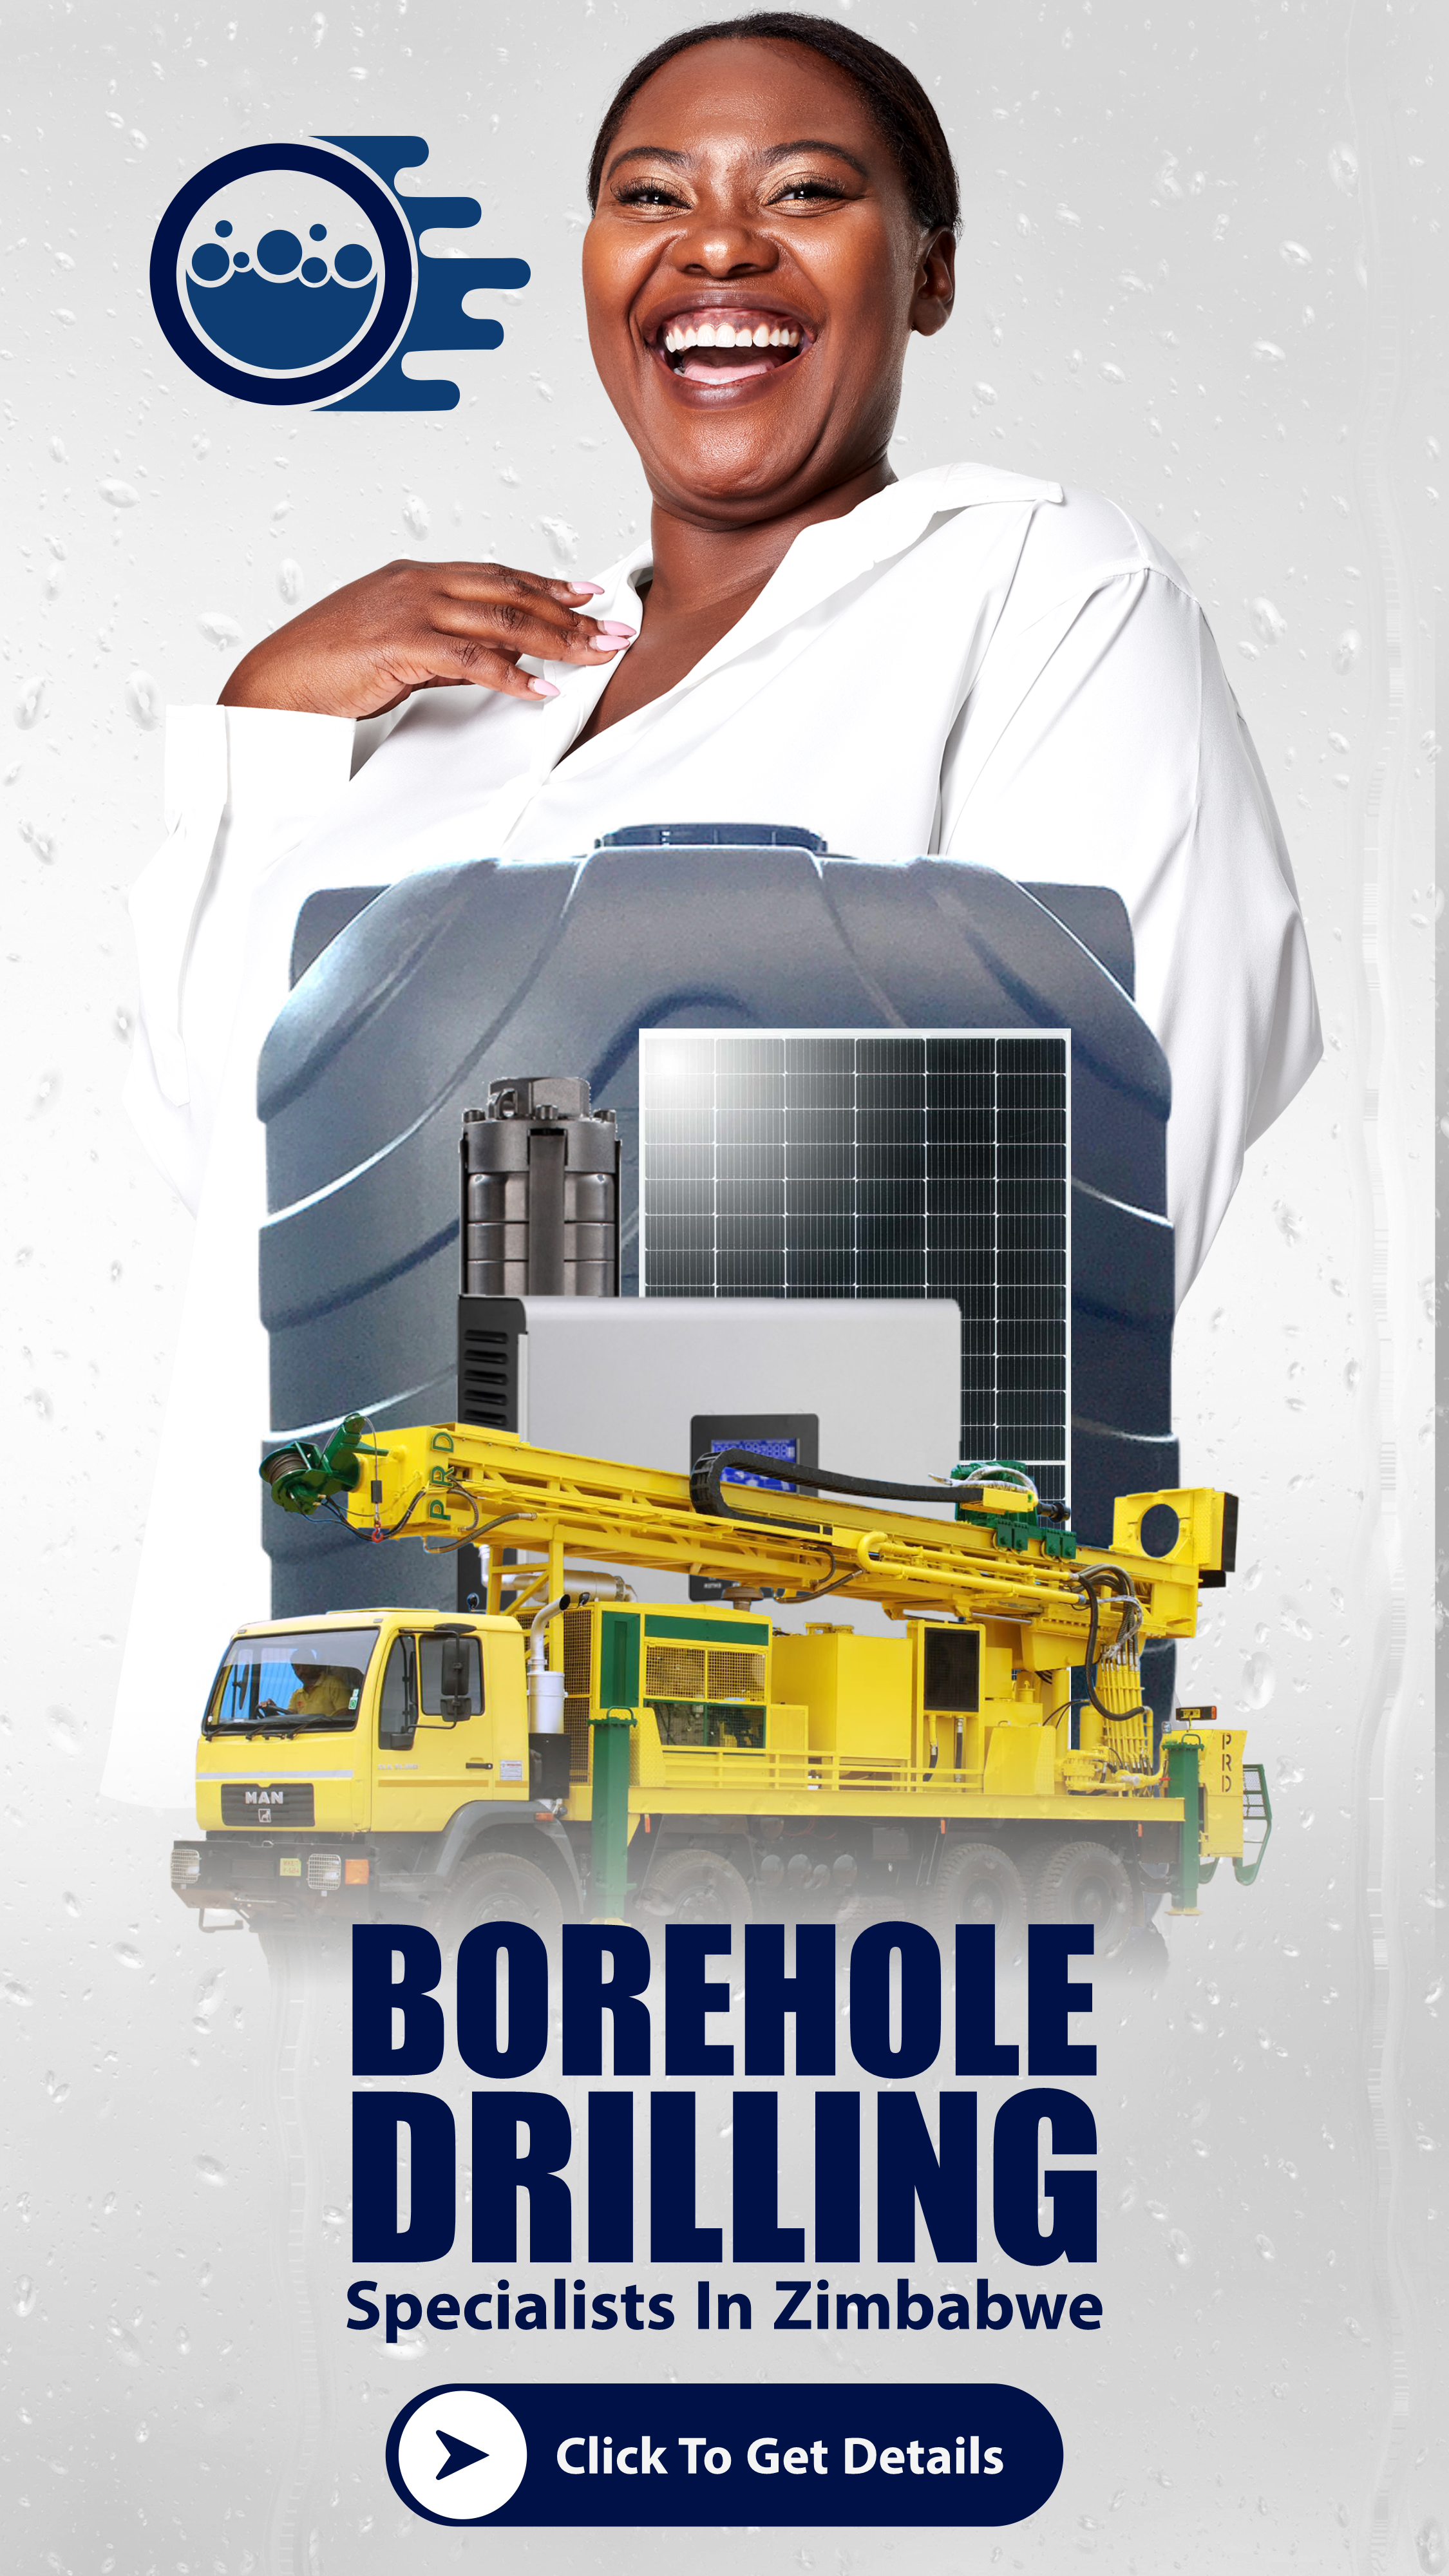 Borehole Drilling Specialists in Zimbabwe